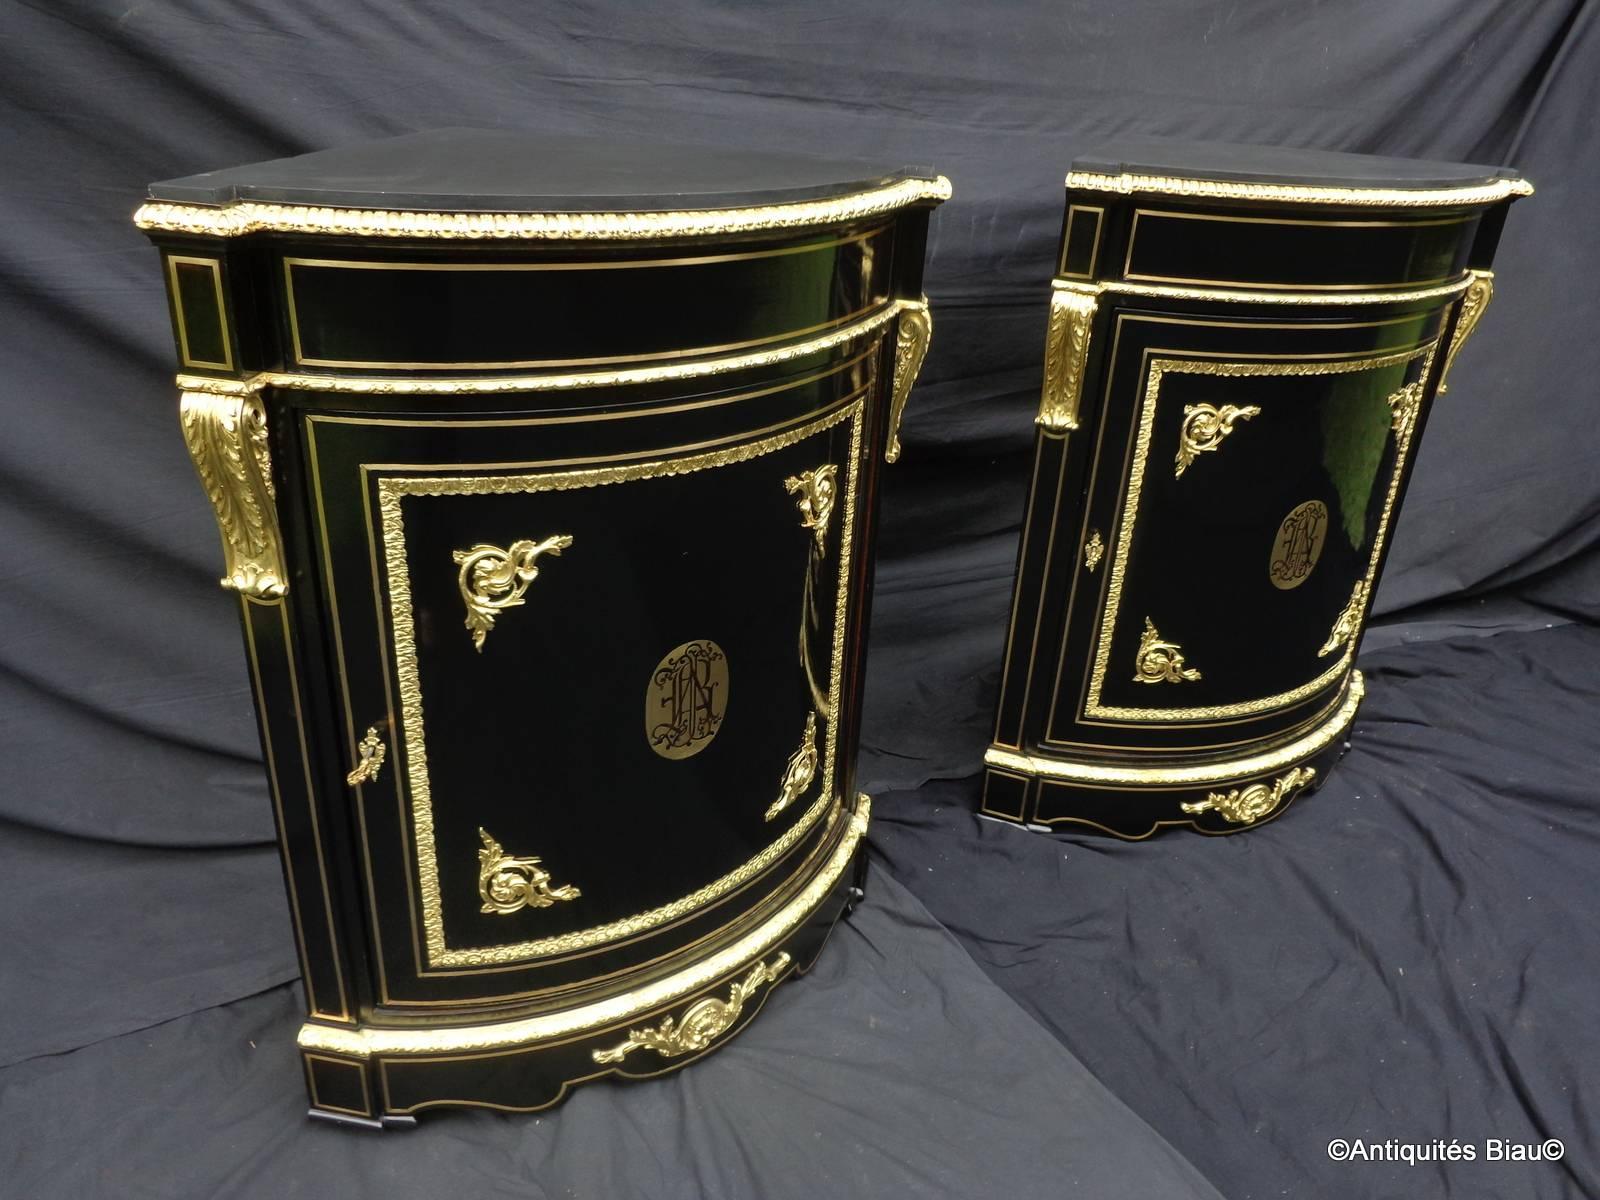 Pair of Furniture of corners with brass inlay
monogrammed center in brown tortoiseshell
before Napoleon III period, circa 1820.
 
Doors embellished with spandrels to acanthus leaf and frame in bronze.
Beautiful caryatids called